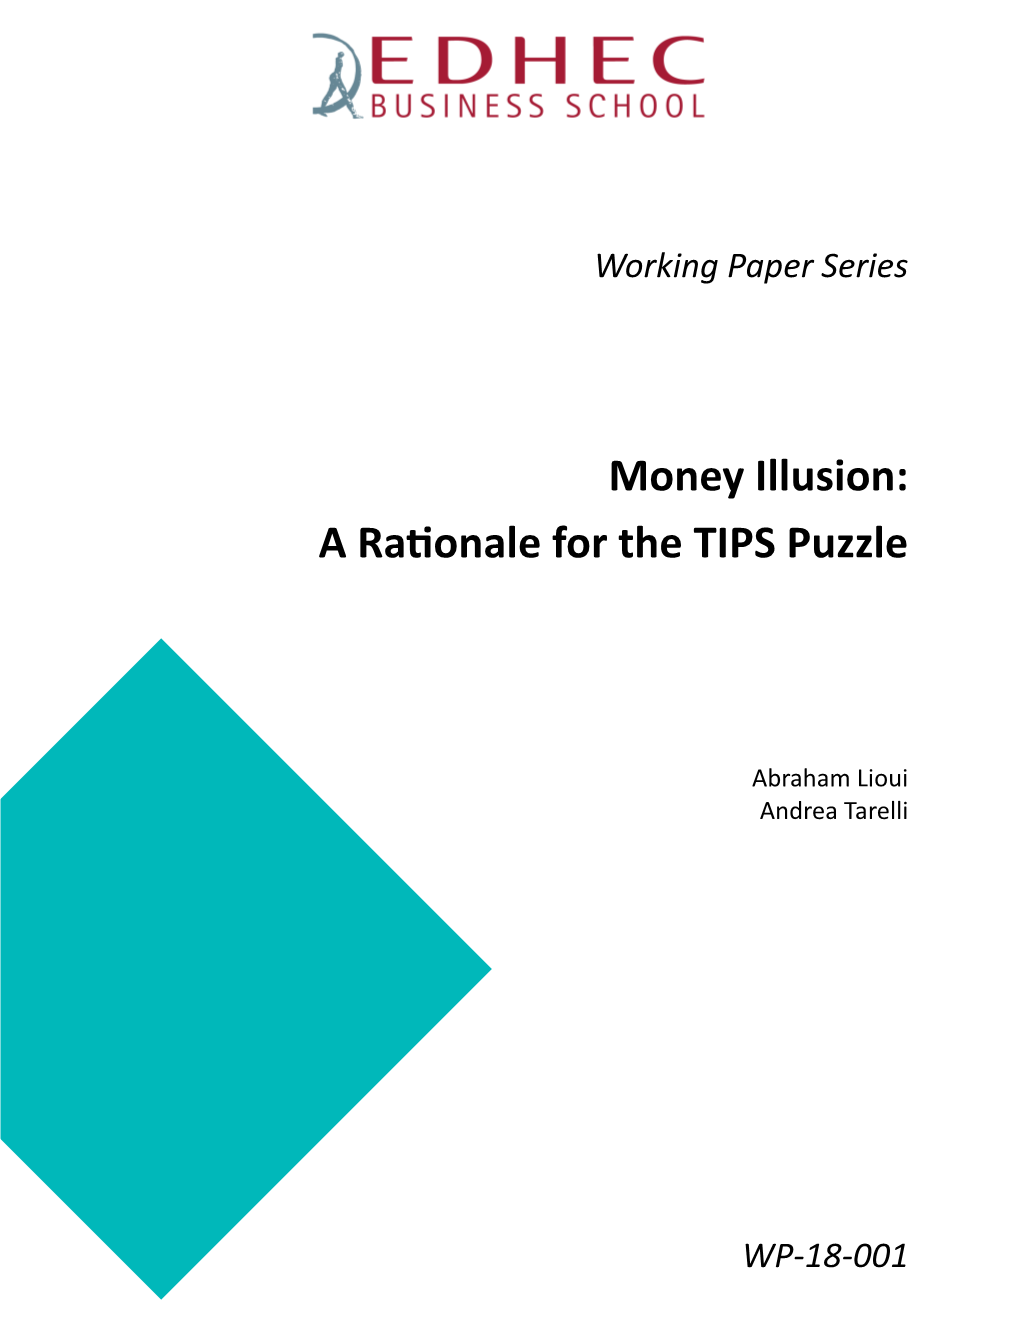 Money Illusion: a Rationale for the TIPS Puzzle